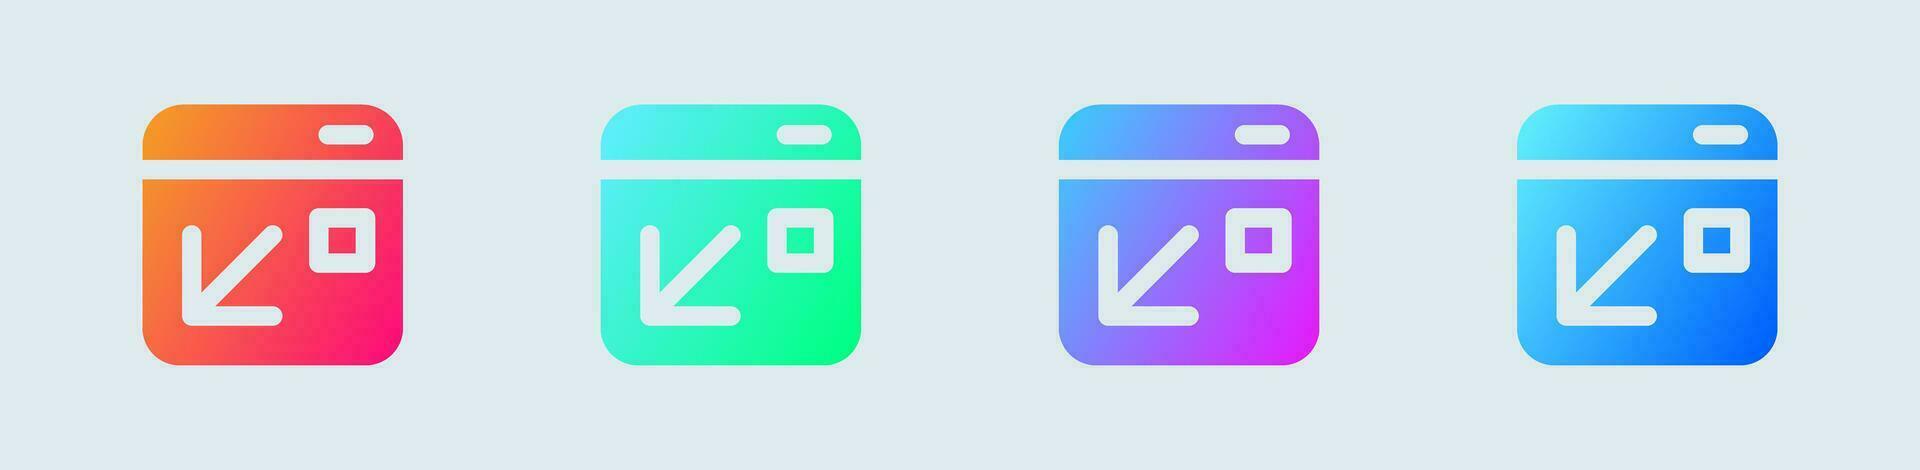 Minimize solid icon in gradient colors. Screen size signs vector illustration.